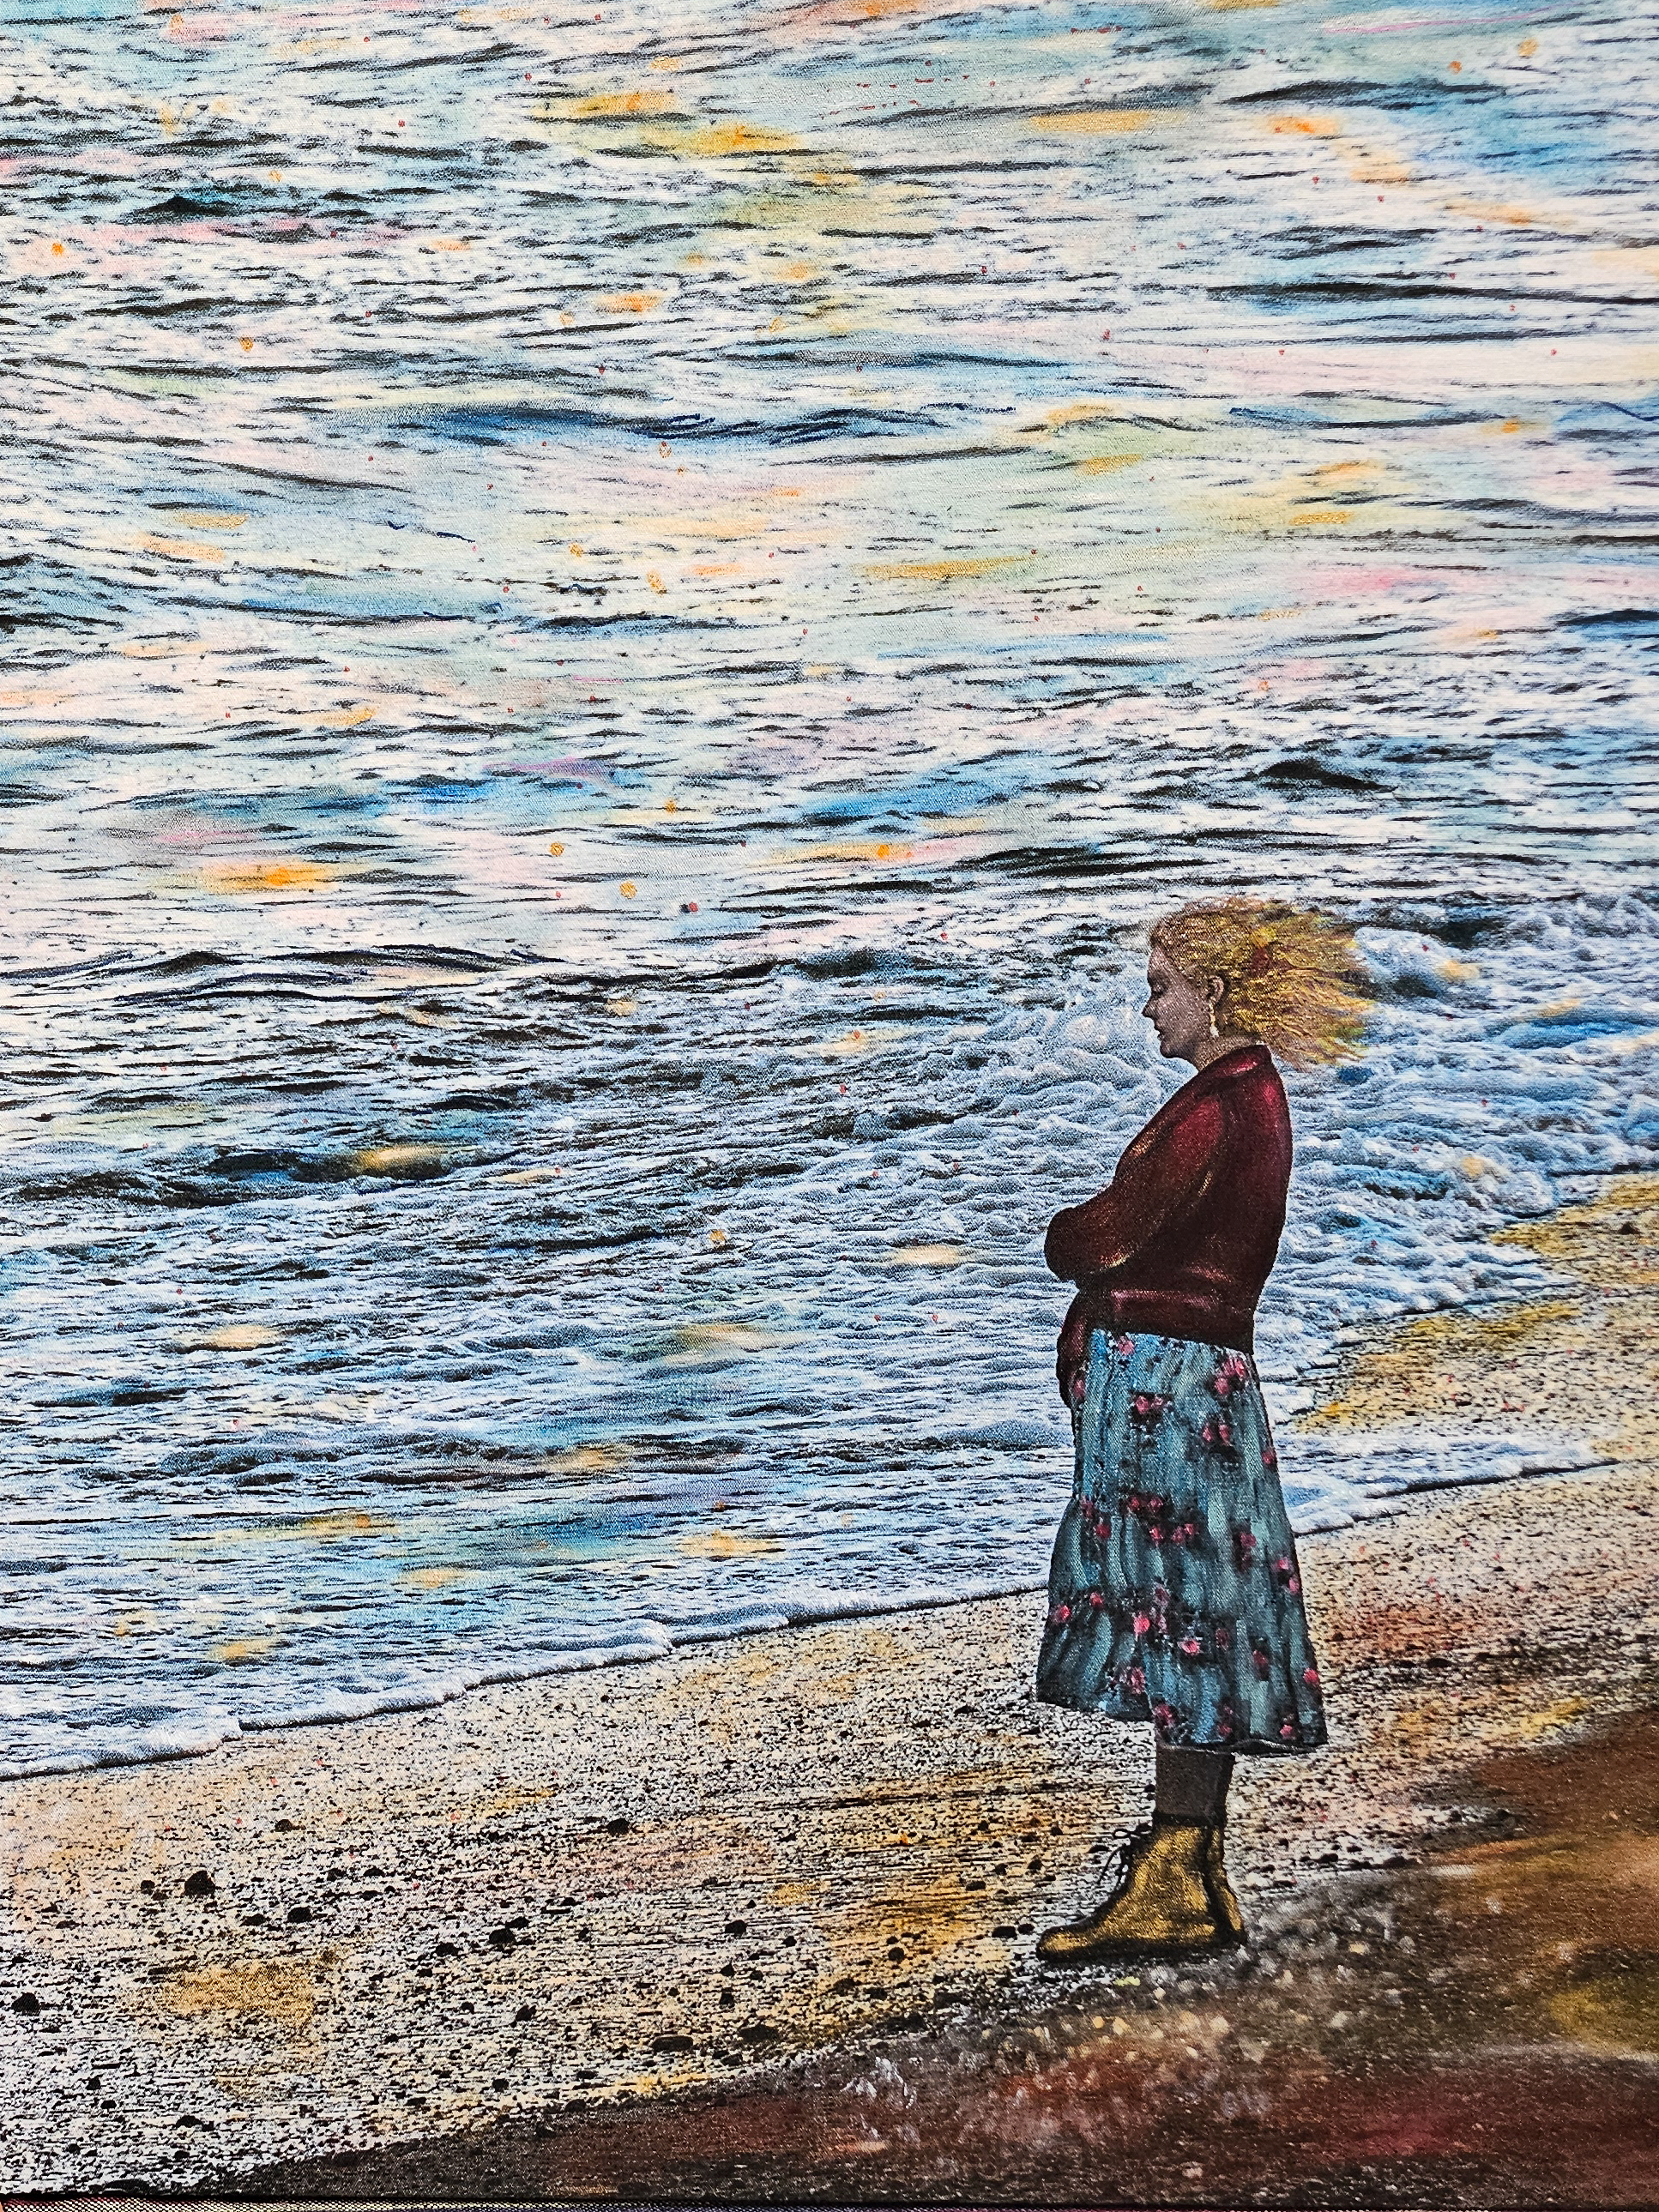 Woman by the Sea by Mika Hadar